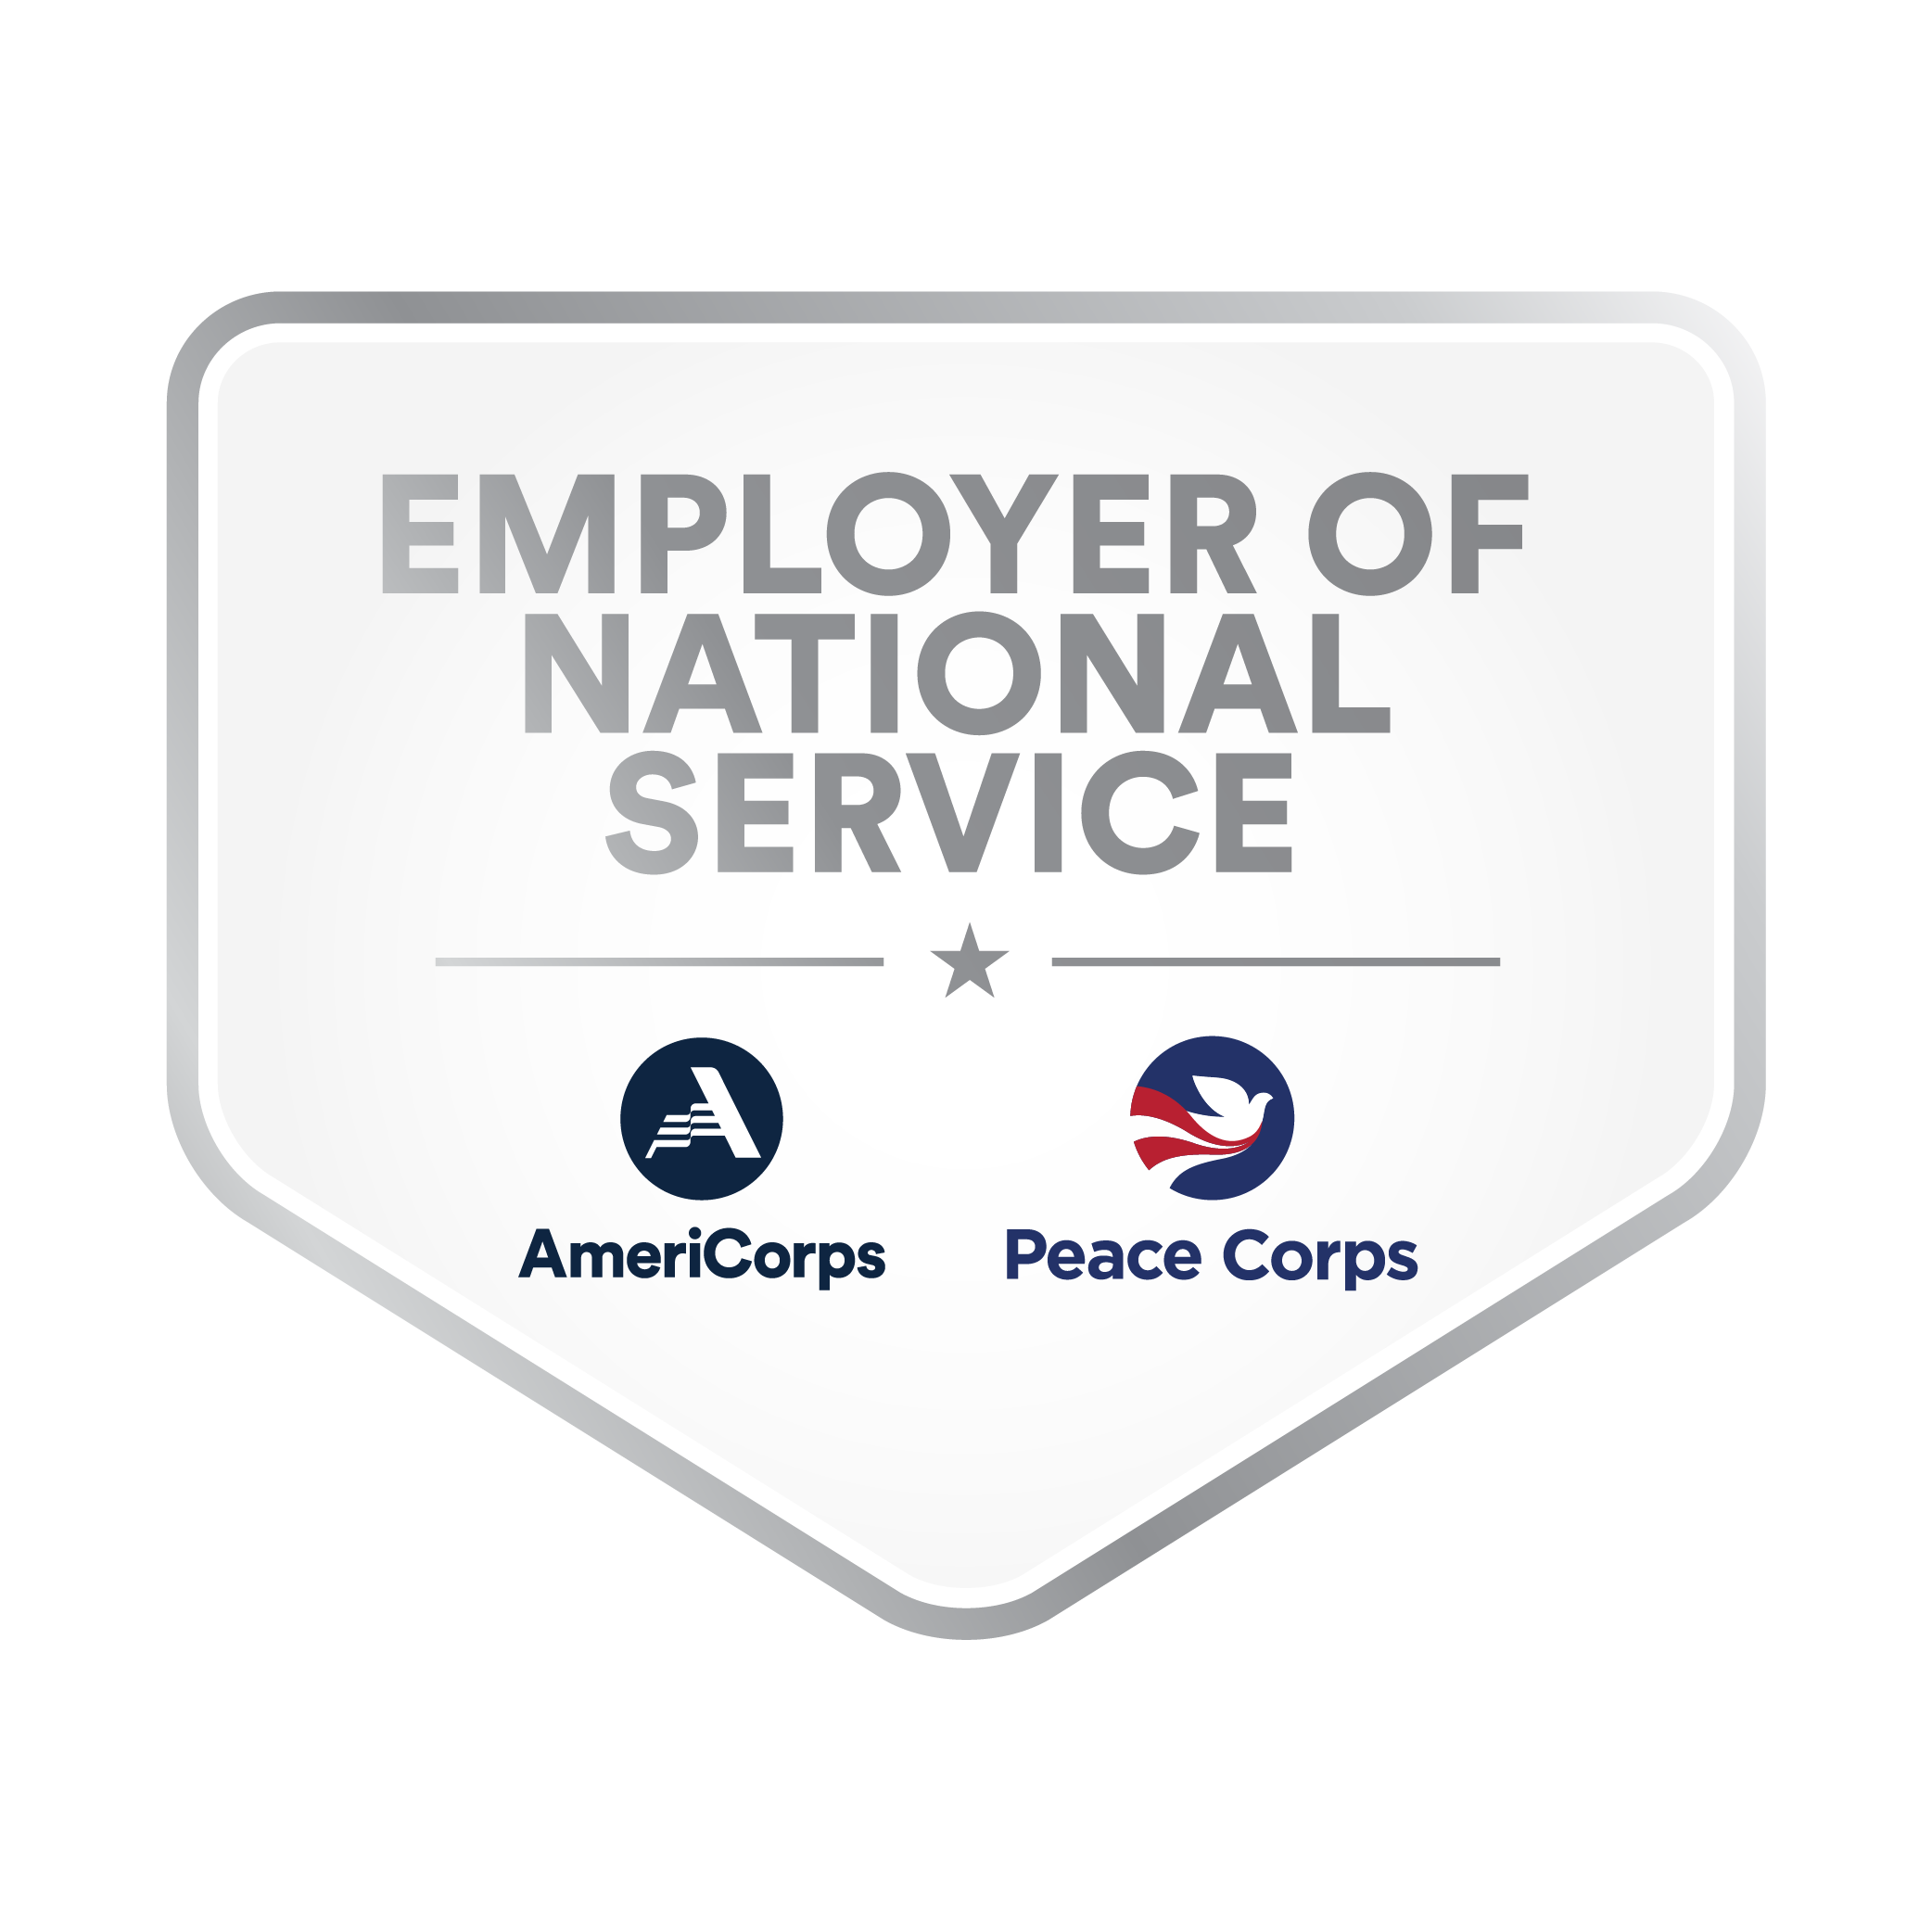 Employers of National Service